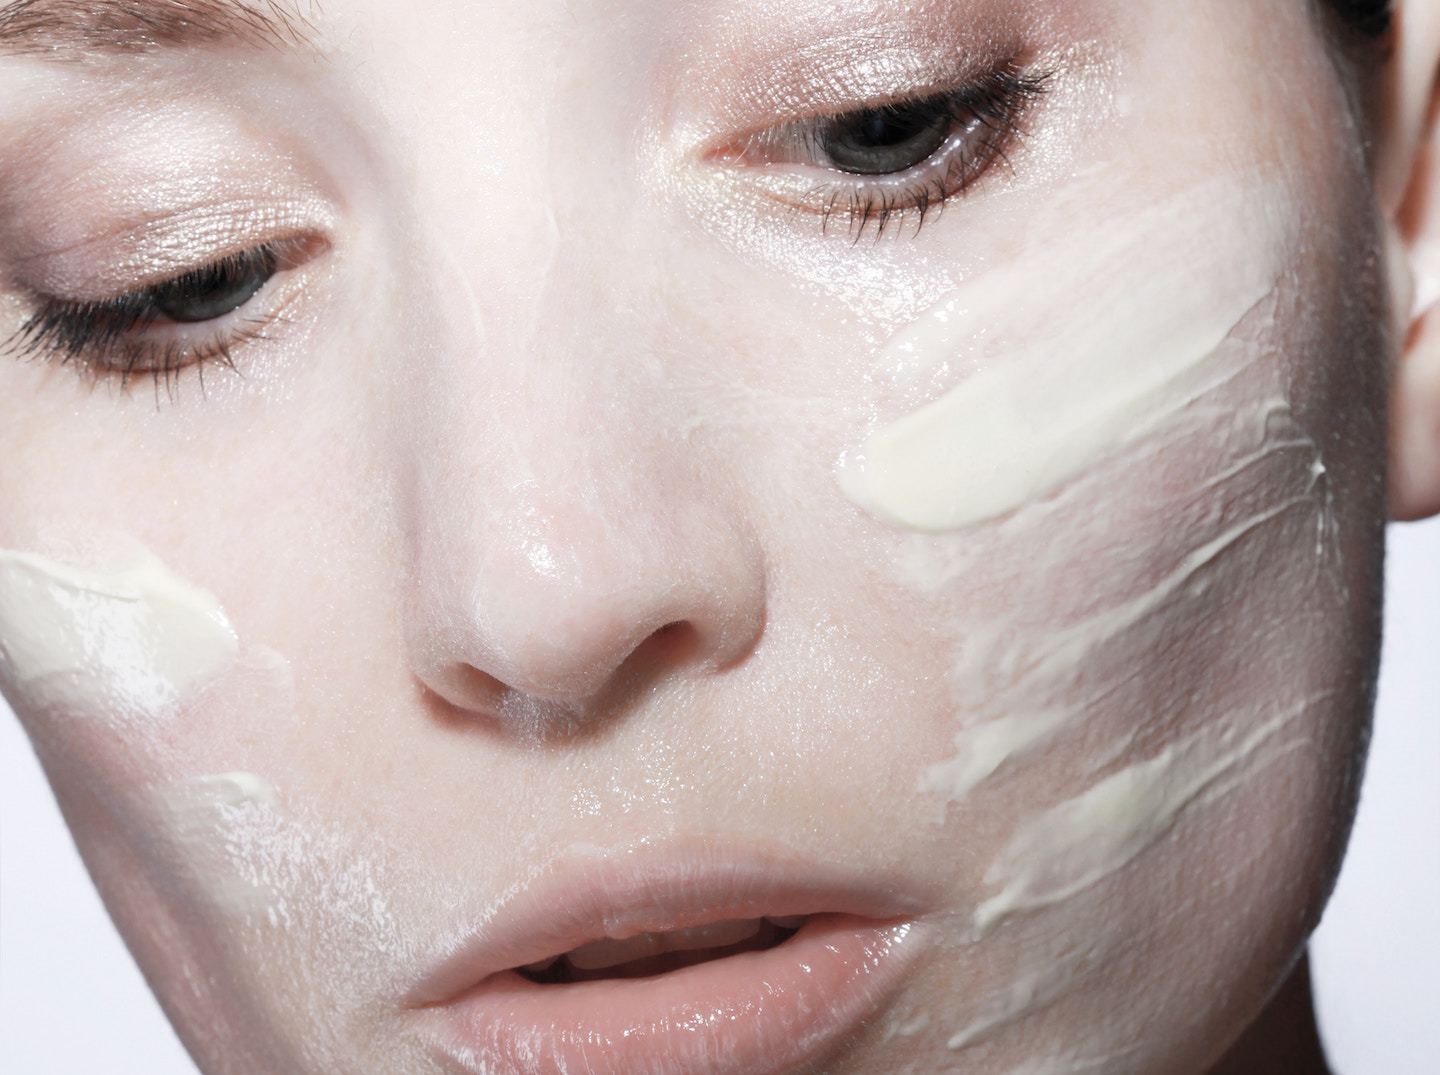 The Best Skincare Routine for Oily Skin Should Have These 6 Things